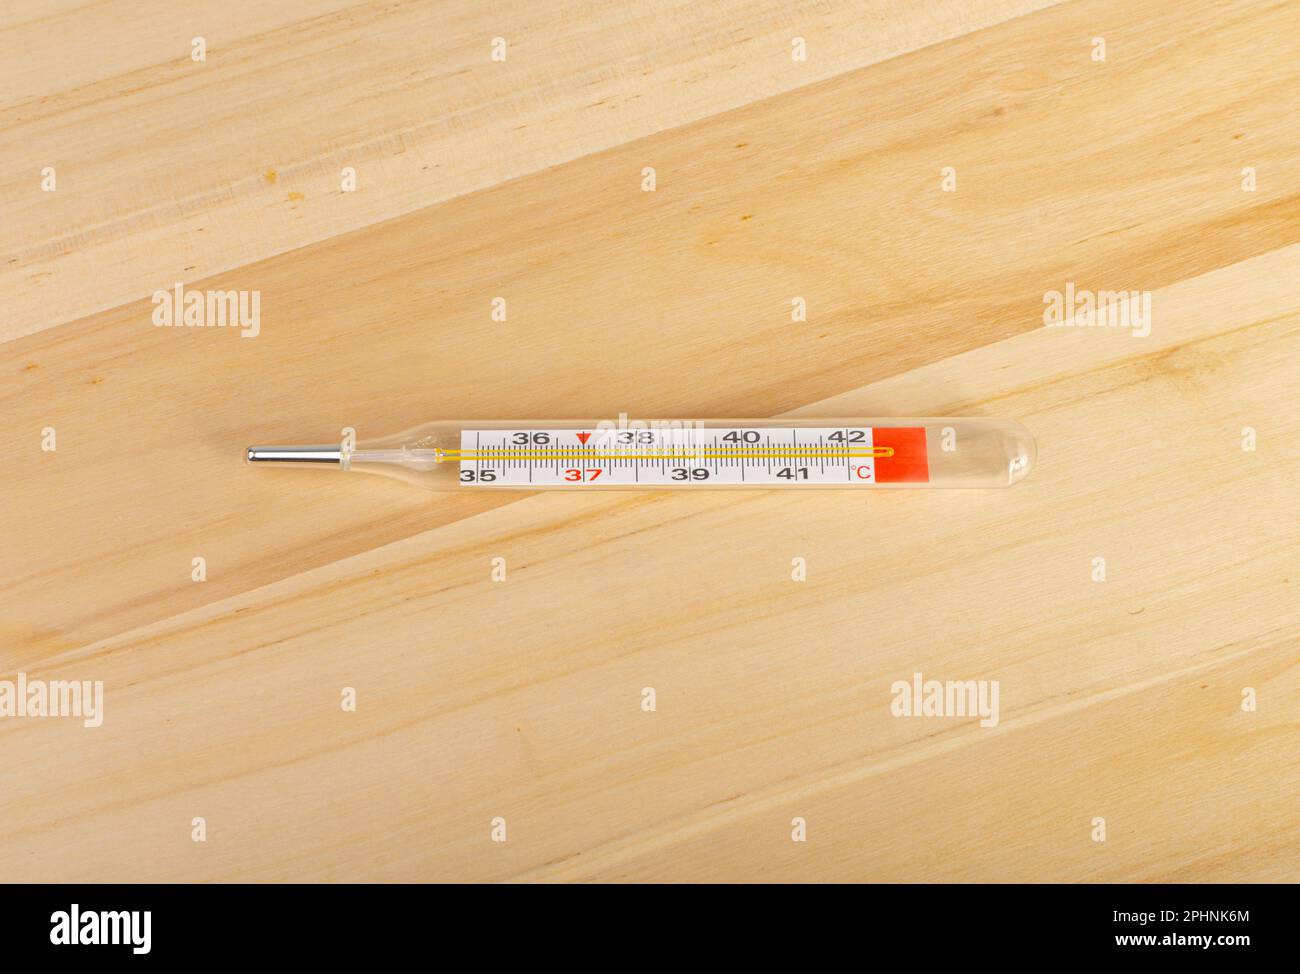 https://c8.alamy.com/comp/2PHNK6M/medical-thermometer-on-wood-background-temperature-measuring-fever-glass-medical-thermometer-top-view-copy-space-2PHNK6M.jpg